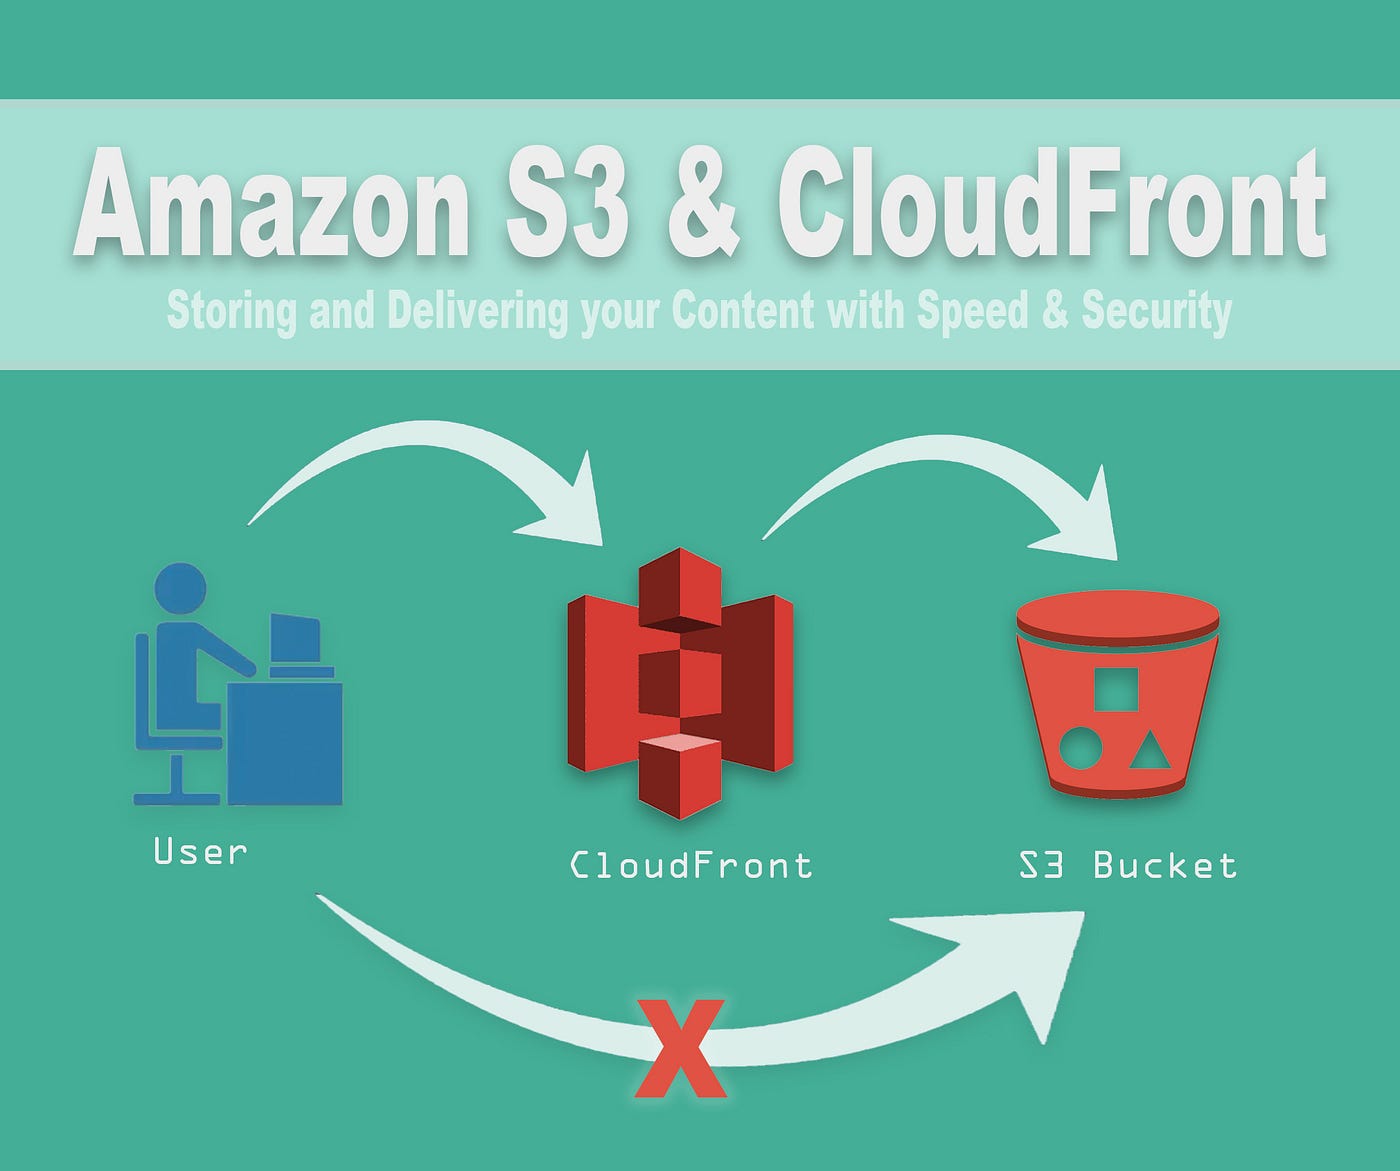 Amazon S3 + Amazon CloudFront: The Cloud Power Couple | by Kinsey Parham |  AWS in Plain English